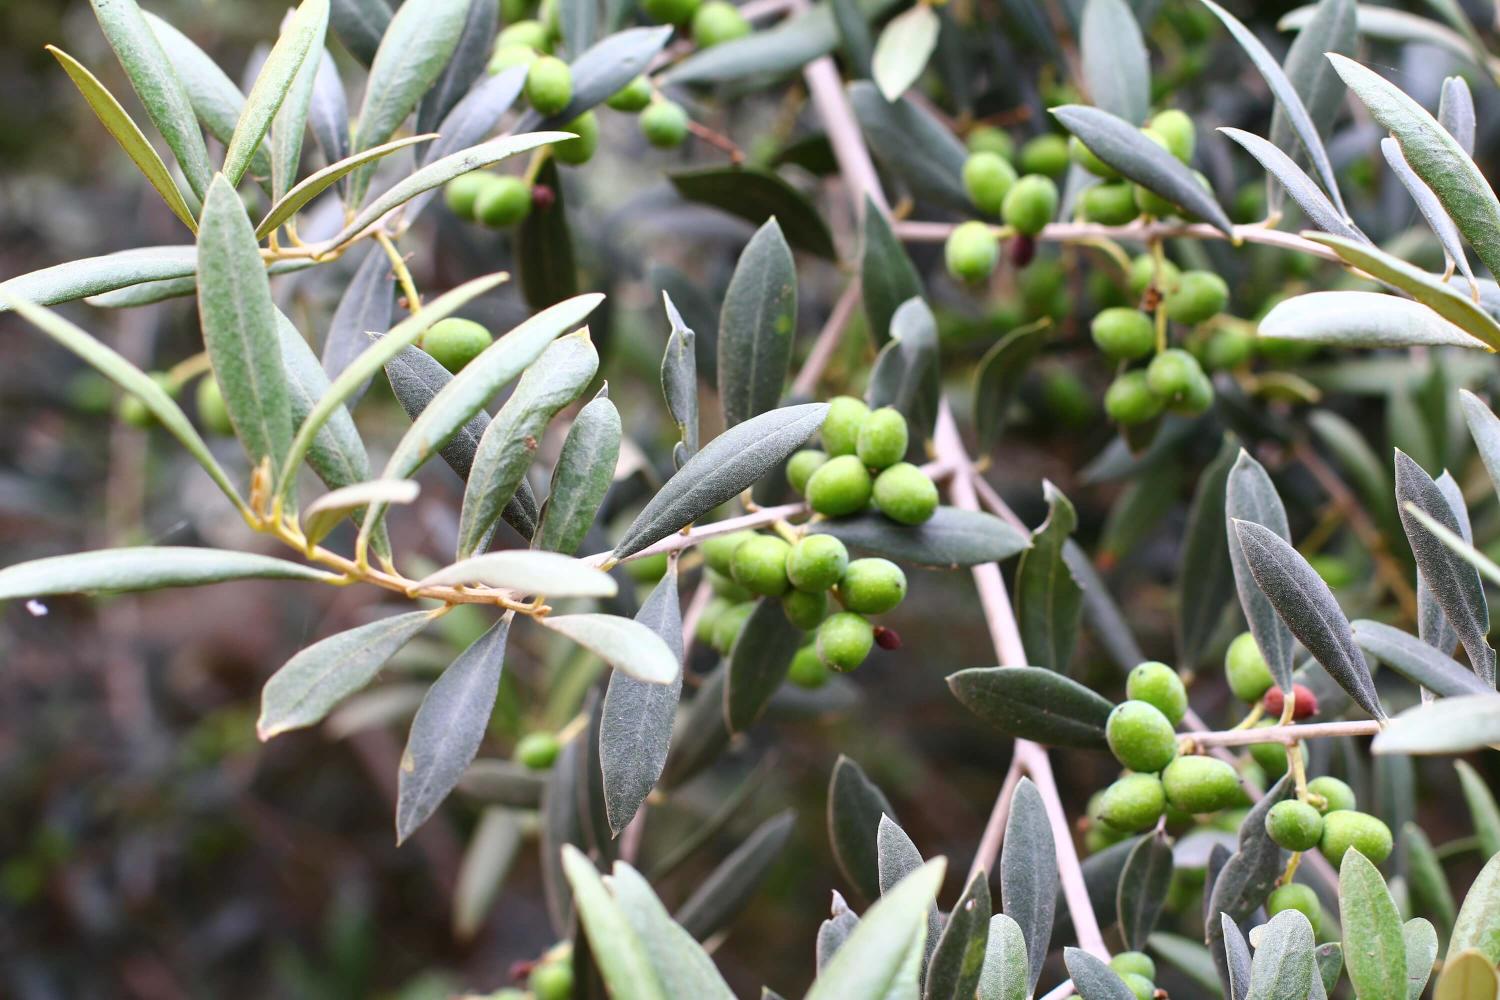 Olives - nutrient bomb of the olive tree